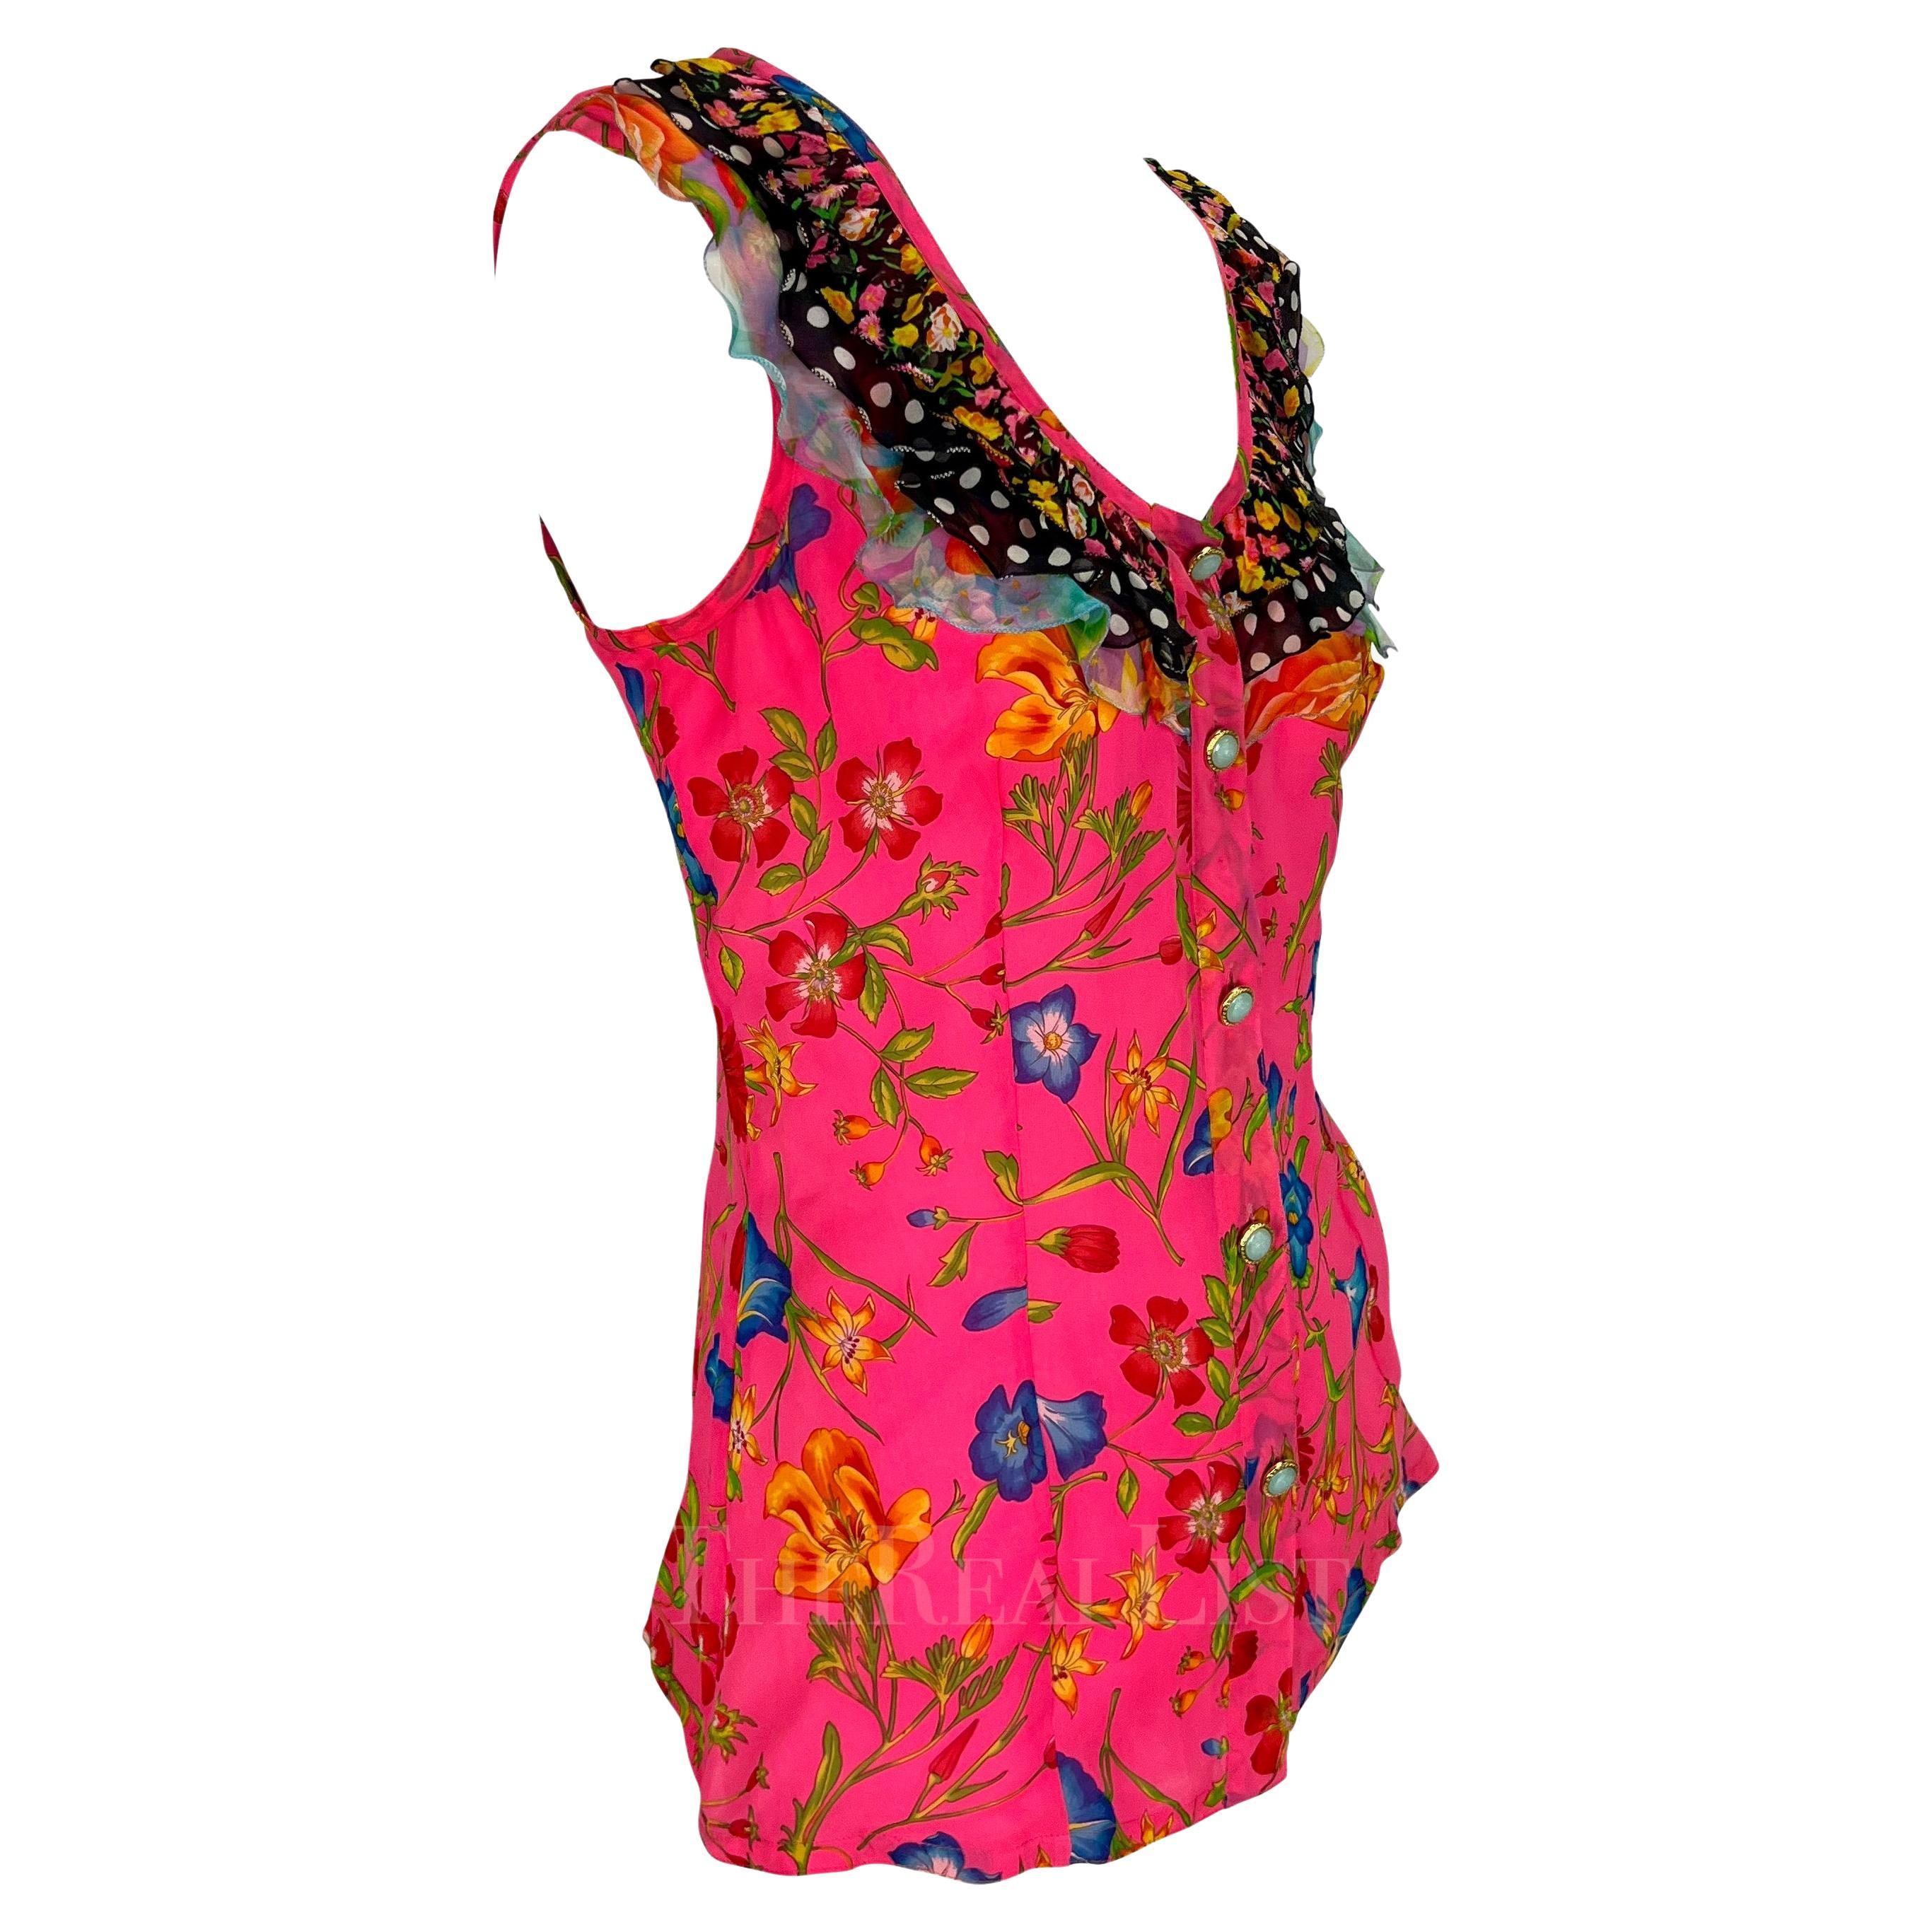 S/S 1993 Gianni Versace Runway Pink Floral Ruffle Medusa Sleeveless Top For Sale 4